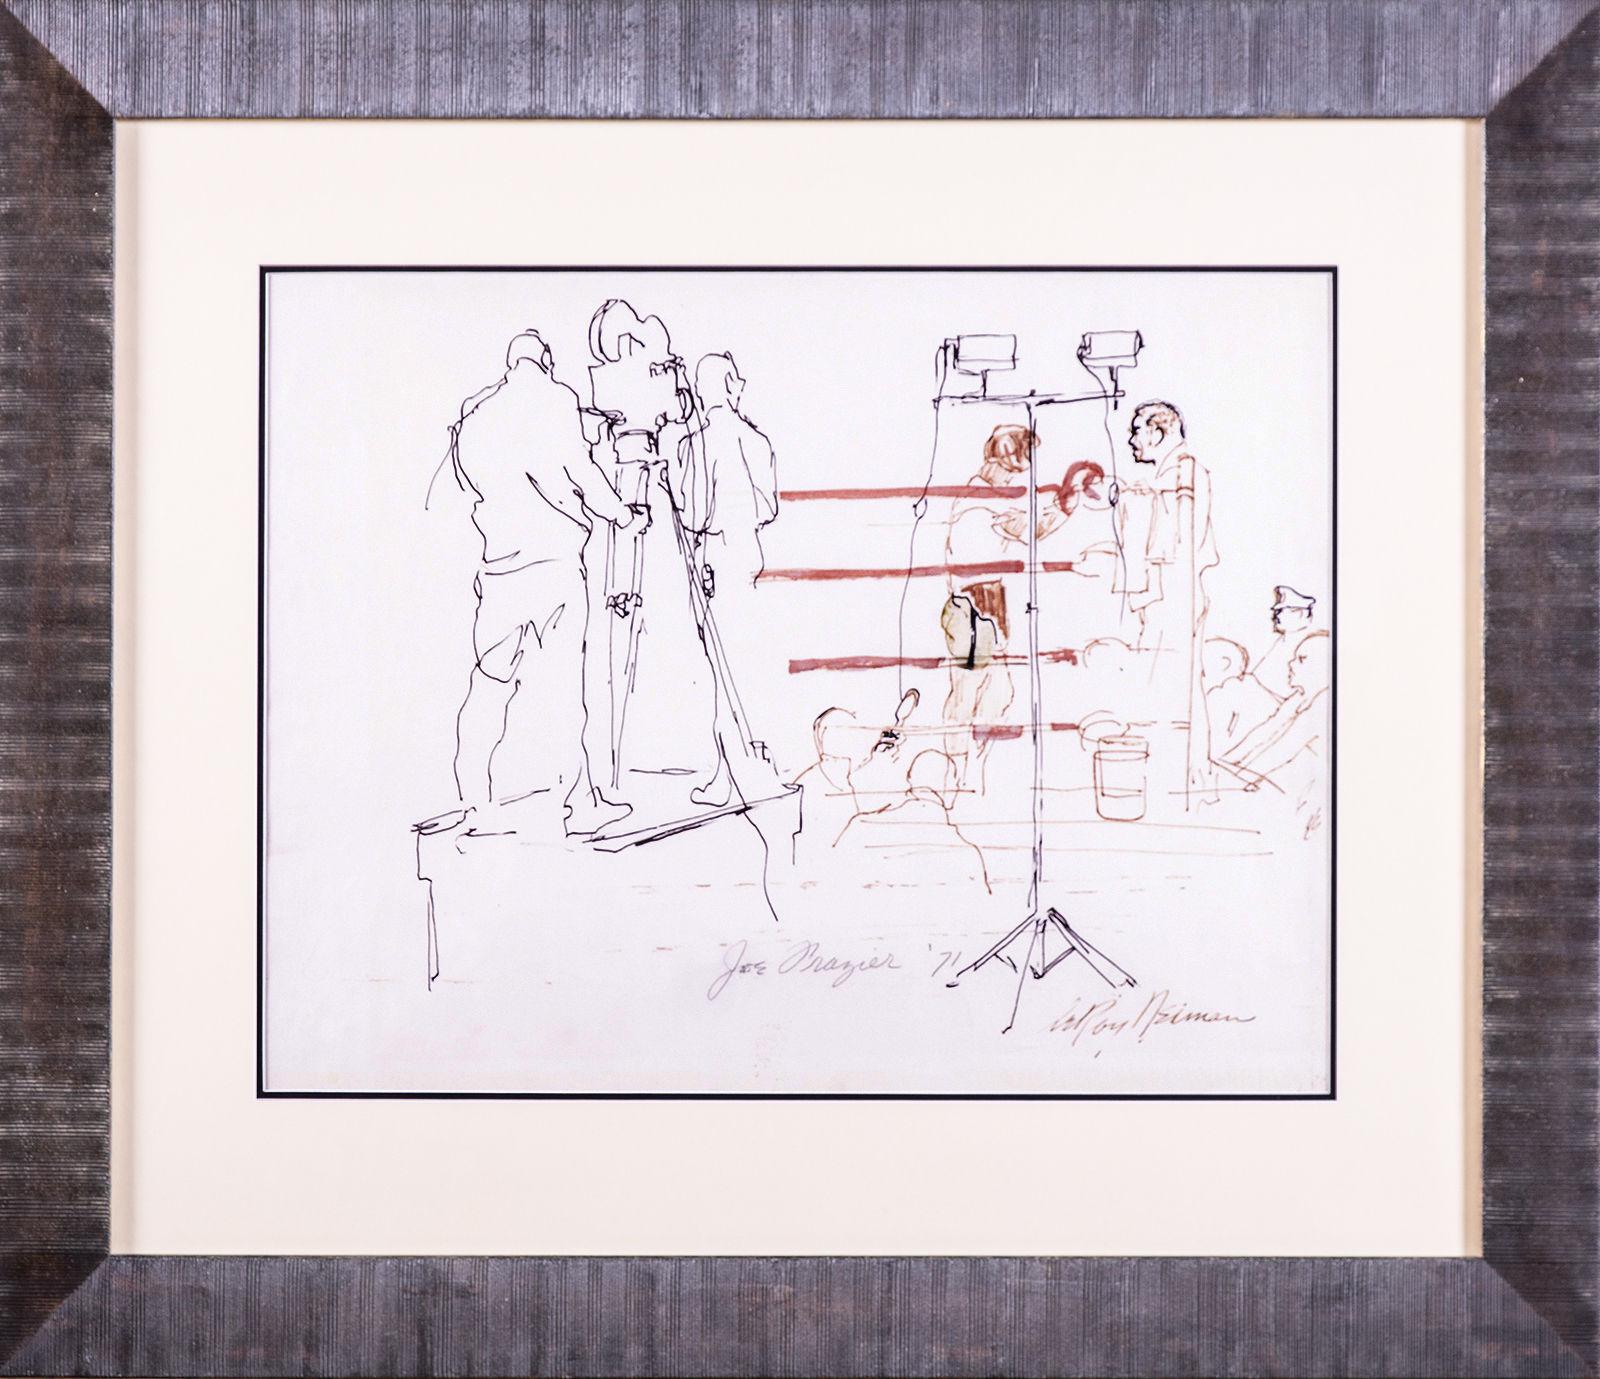 Artist: LeRoy Neiman, American (1921 - 2012)
Title: Joe Frazier
Medium: Original Ink Marker, Watercolor, and Felt Pen on Fine Fabriano Watercolor Paper
Size: 18" x 24"
Framed: 29 1/2" x 35"
Condition: This piece was well maintained and kept out of